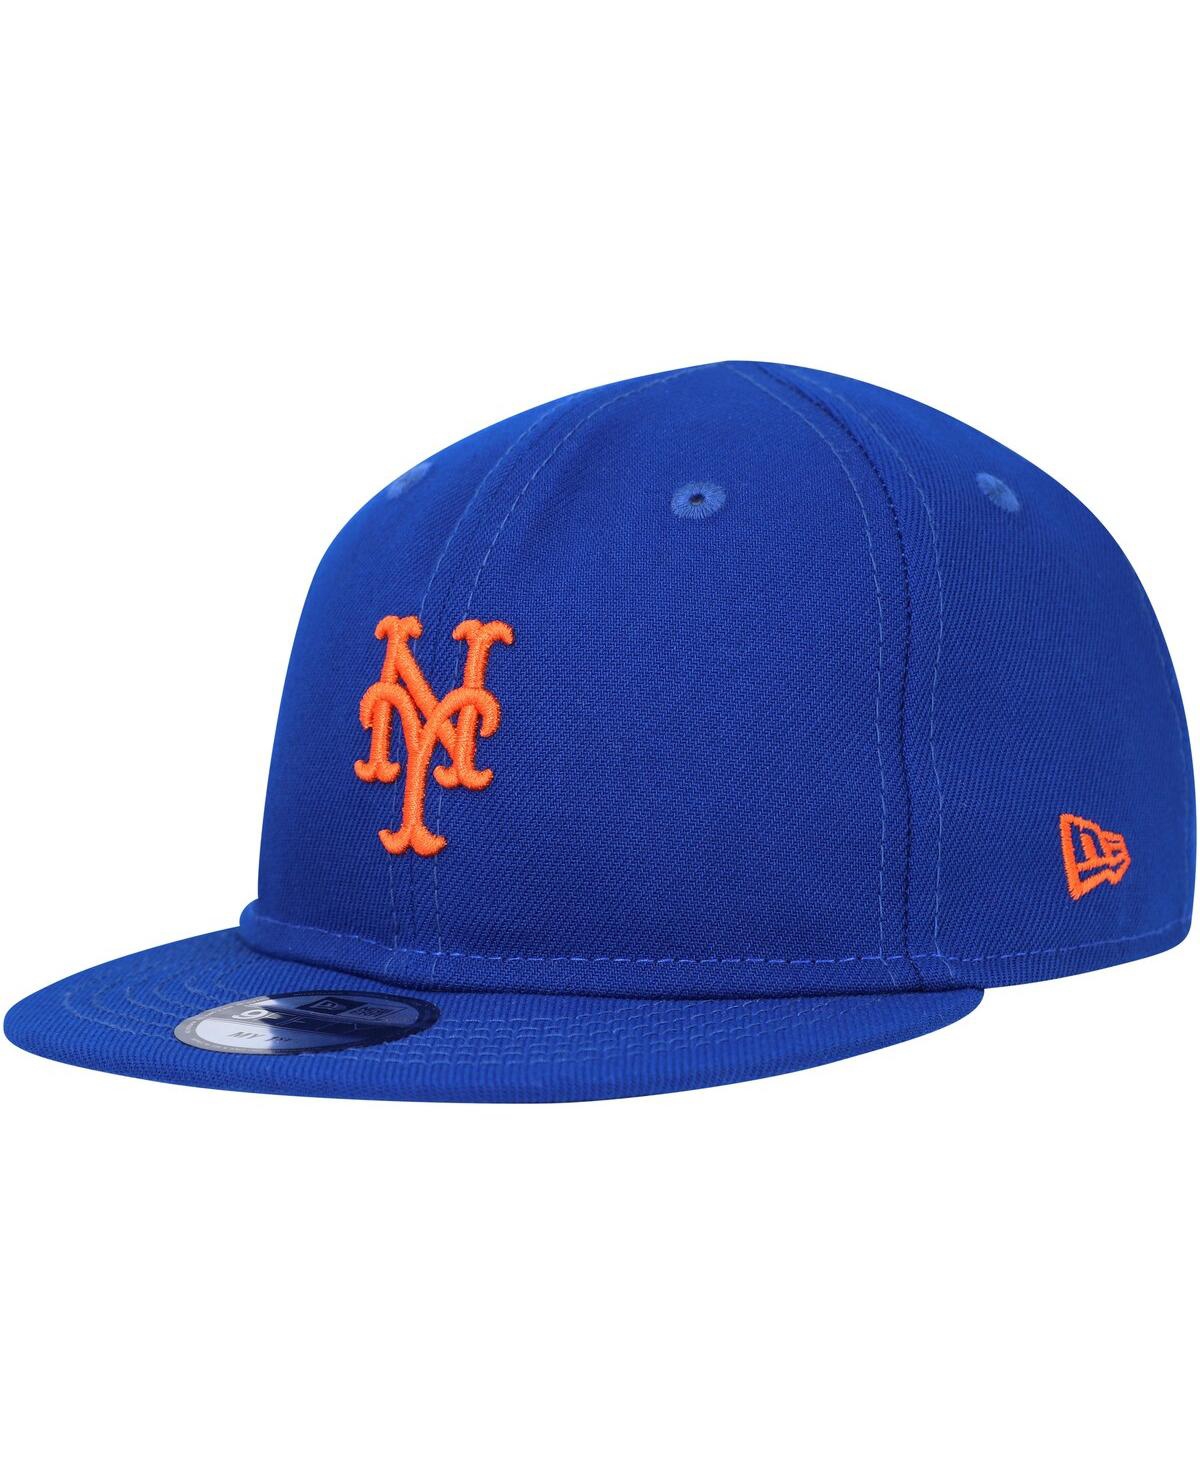 New Era Babies' Infant Boys And Girls  Royal New York Mets My First 9fifty Adjustable Hat